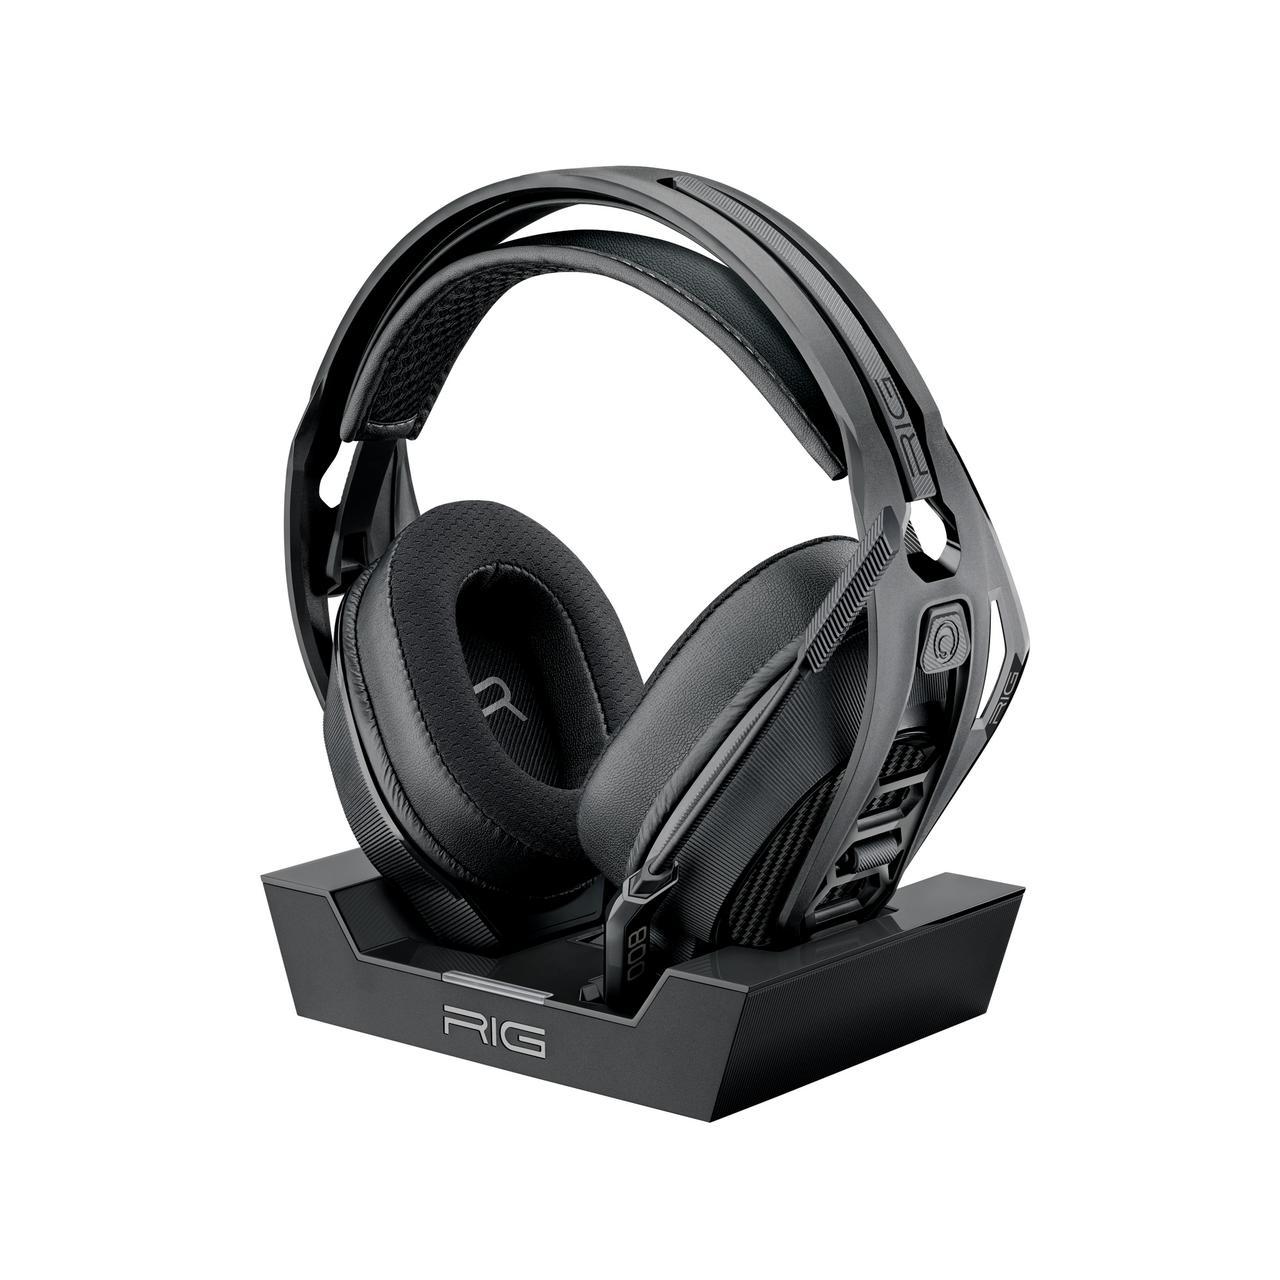 RIG 800 PRO HX Wireless Gaming Headset and Base Station for Xbox One, X/S, PlayStation & PC - Black - image 1 of 14